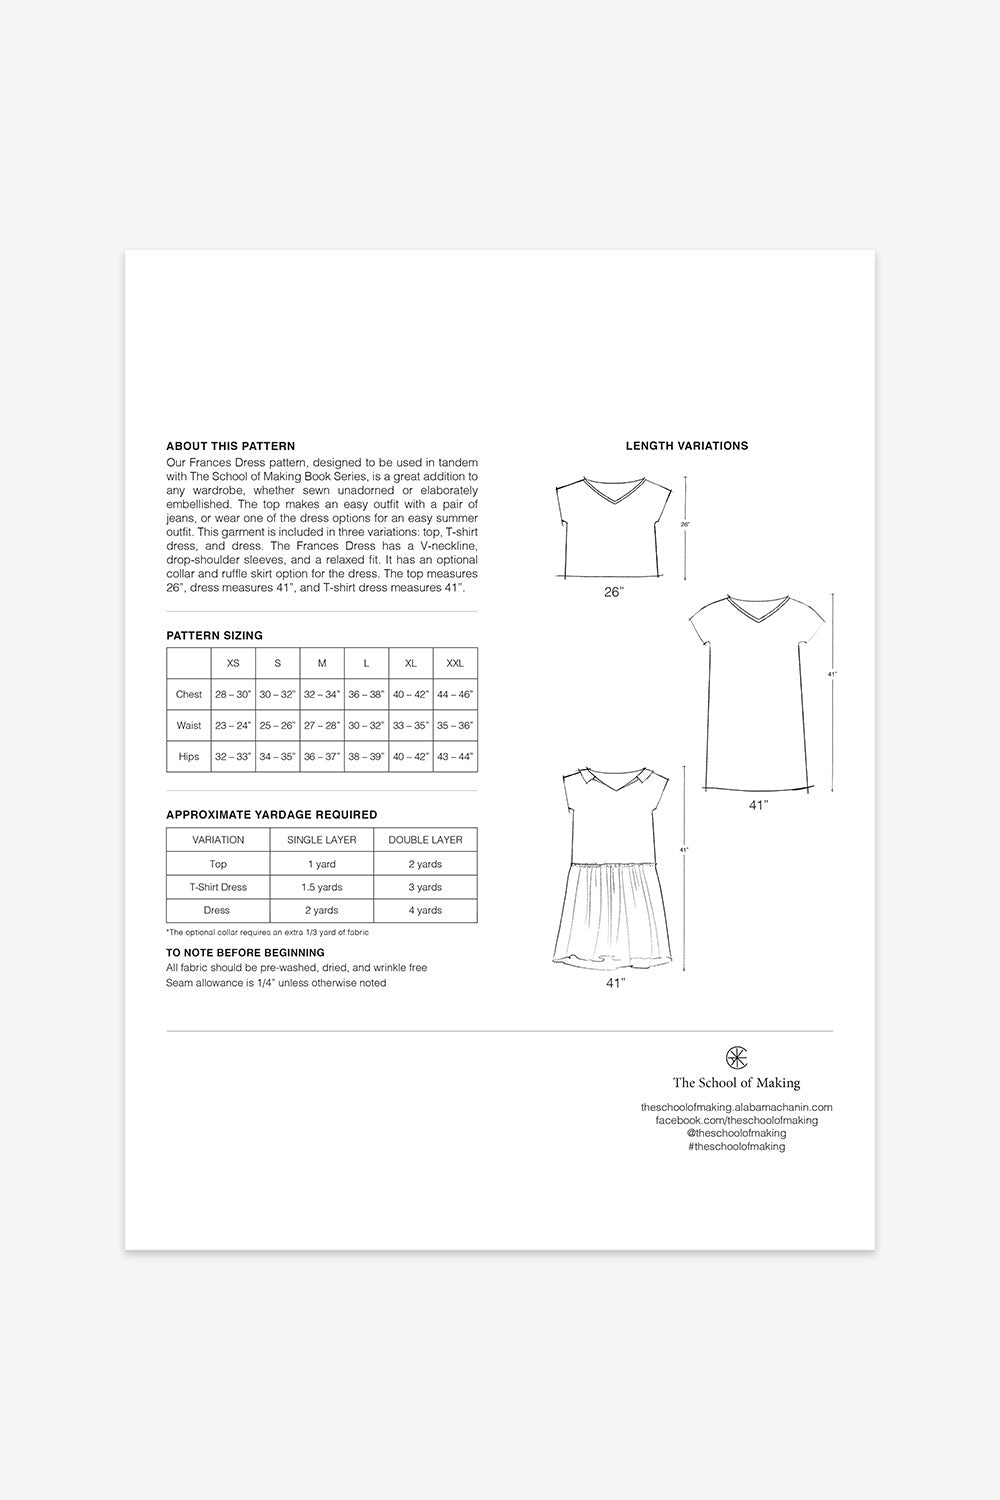 The School of Making Frances Dress Pattern Maker Supplies for Hand-Sewn Clothing.